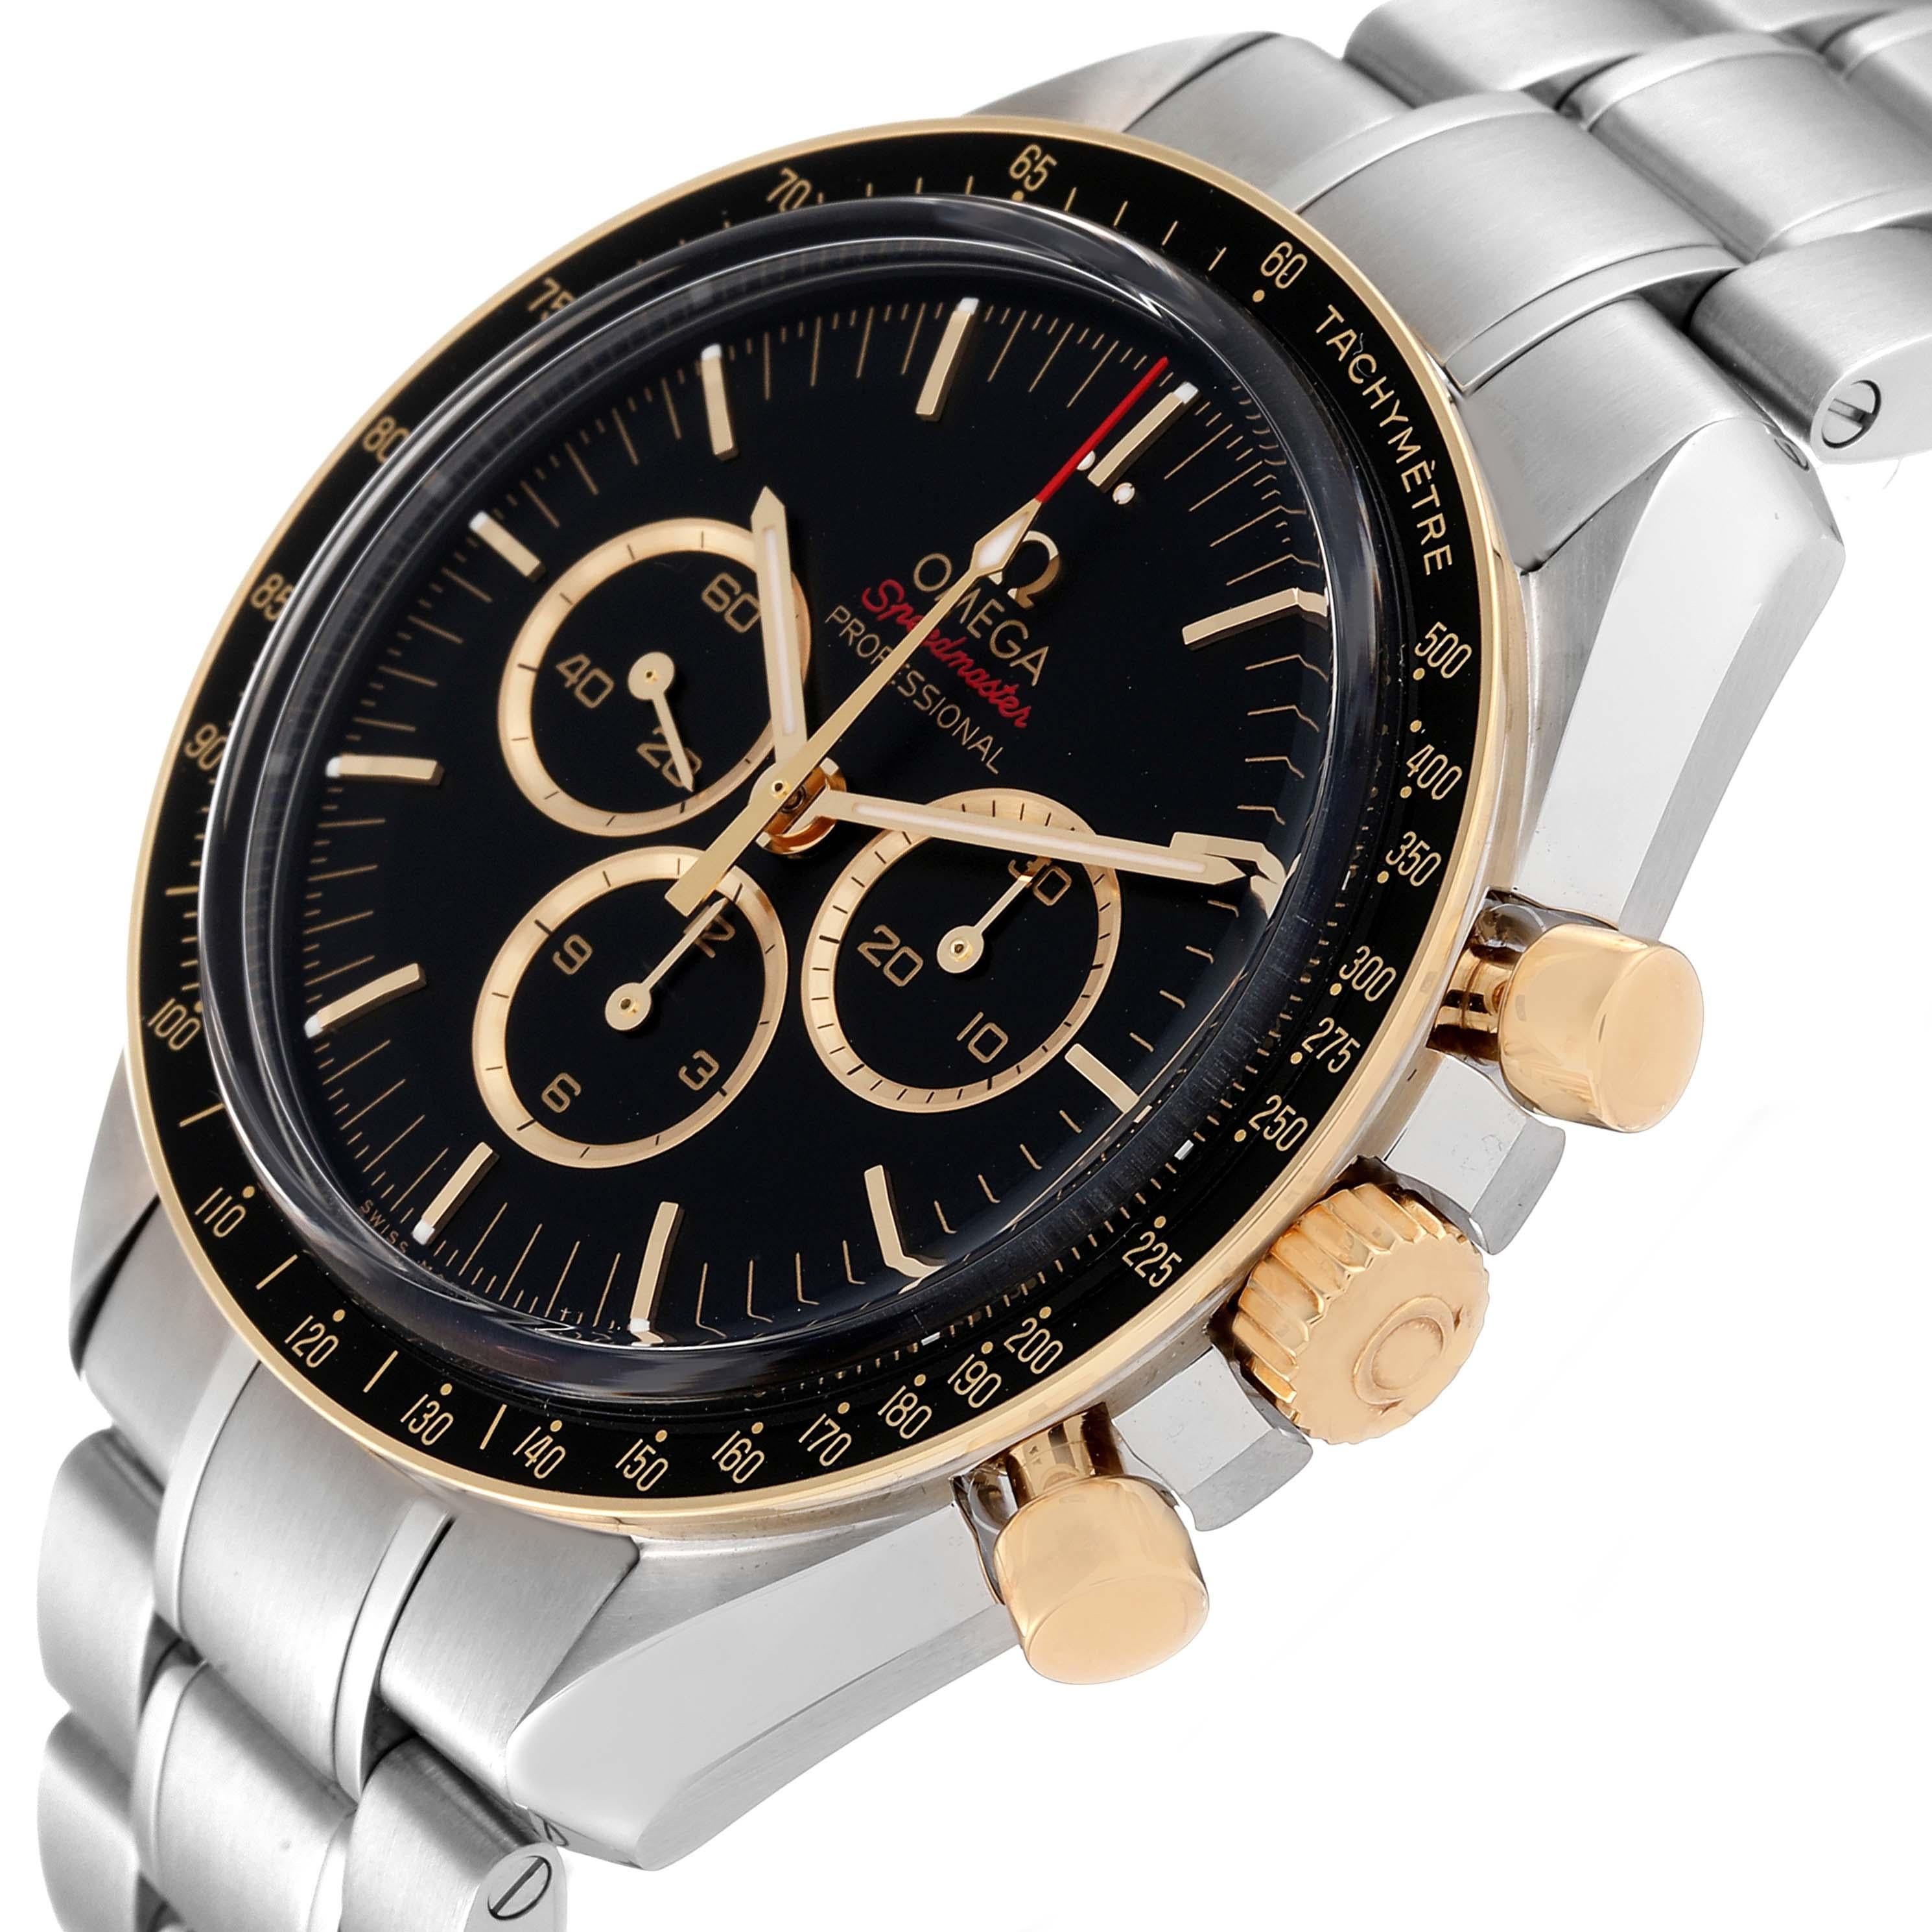 Omega Speedmaster Tokyo 2020 Limited Edition Steel Mens Watch 522.20.42.30.01.001 Box Card. Manual winding chronograph movement. Stainless steel round case 42.0 mm in diameter. 18k yellow gold crown with Omega logo. 18k yellow gold bezel with black